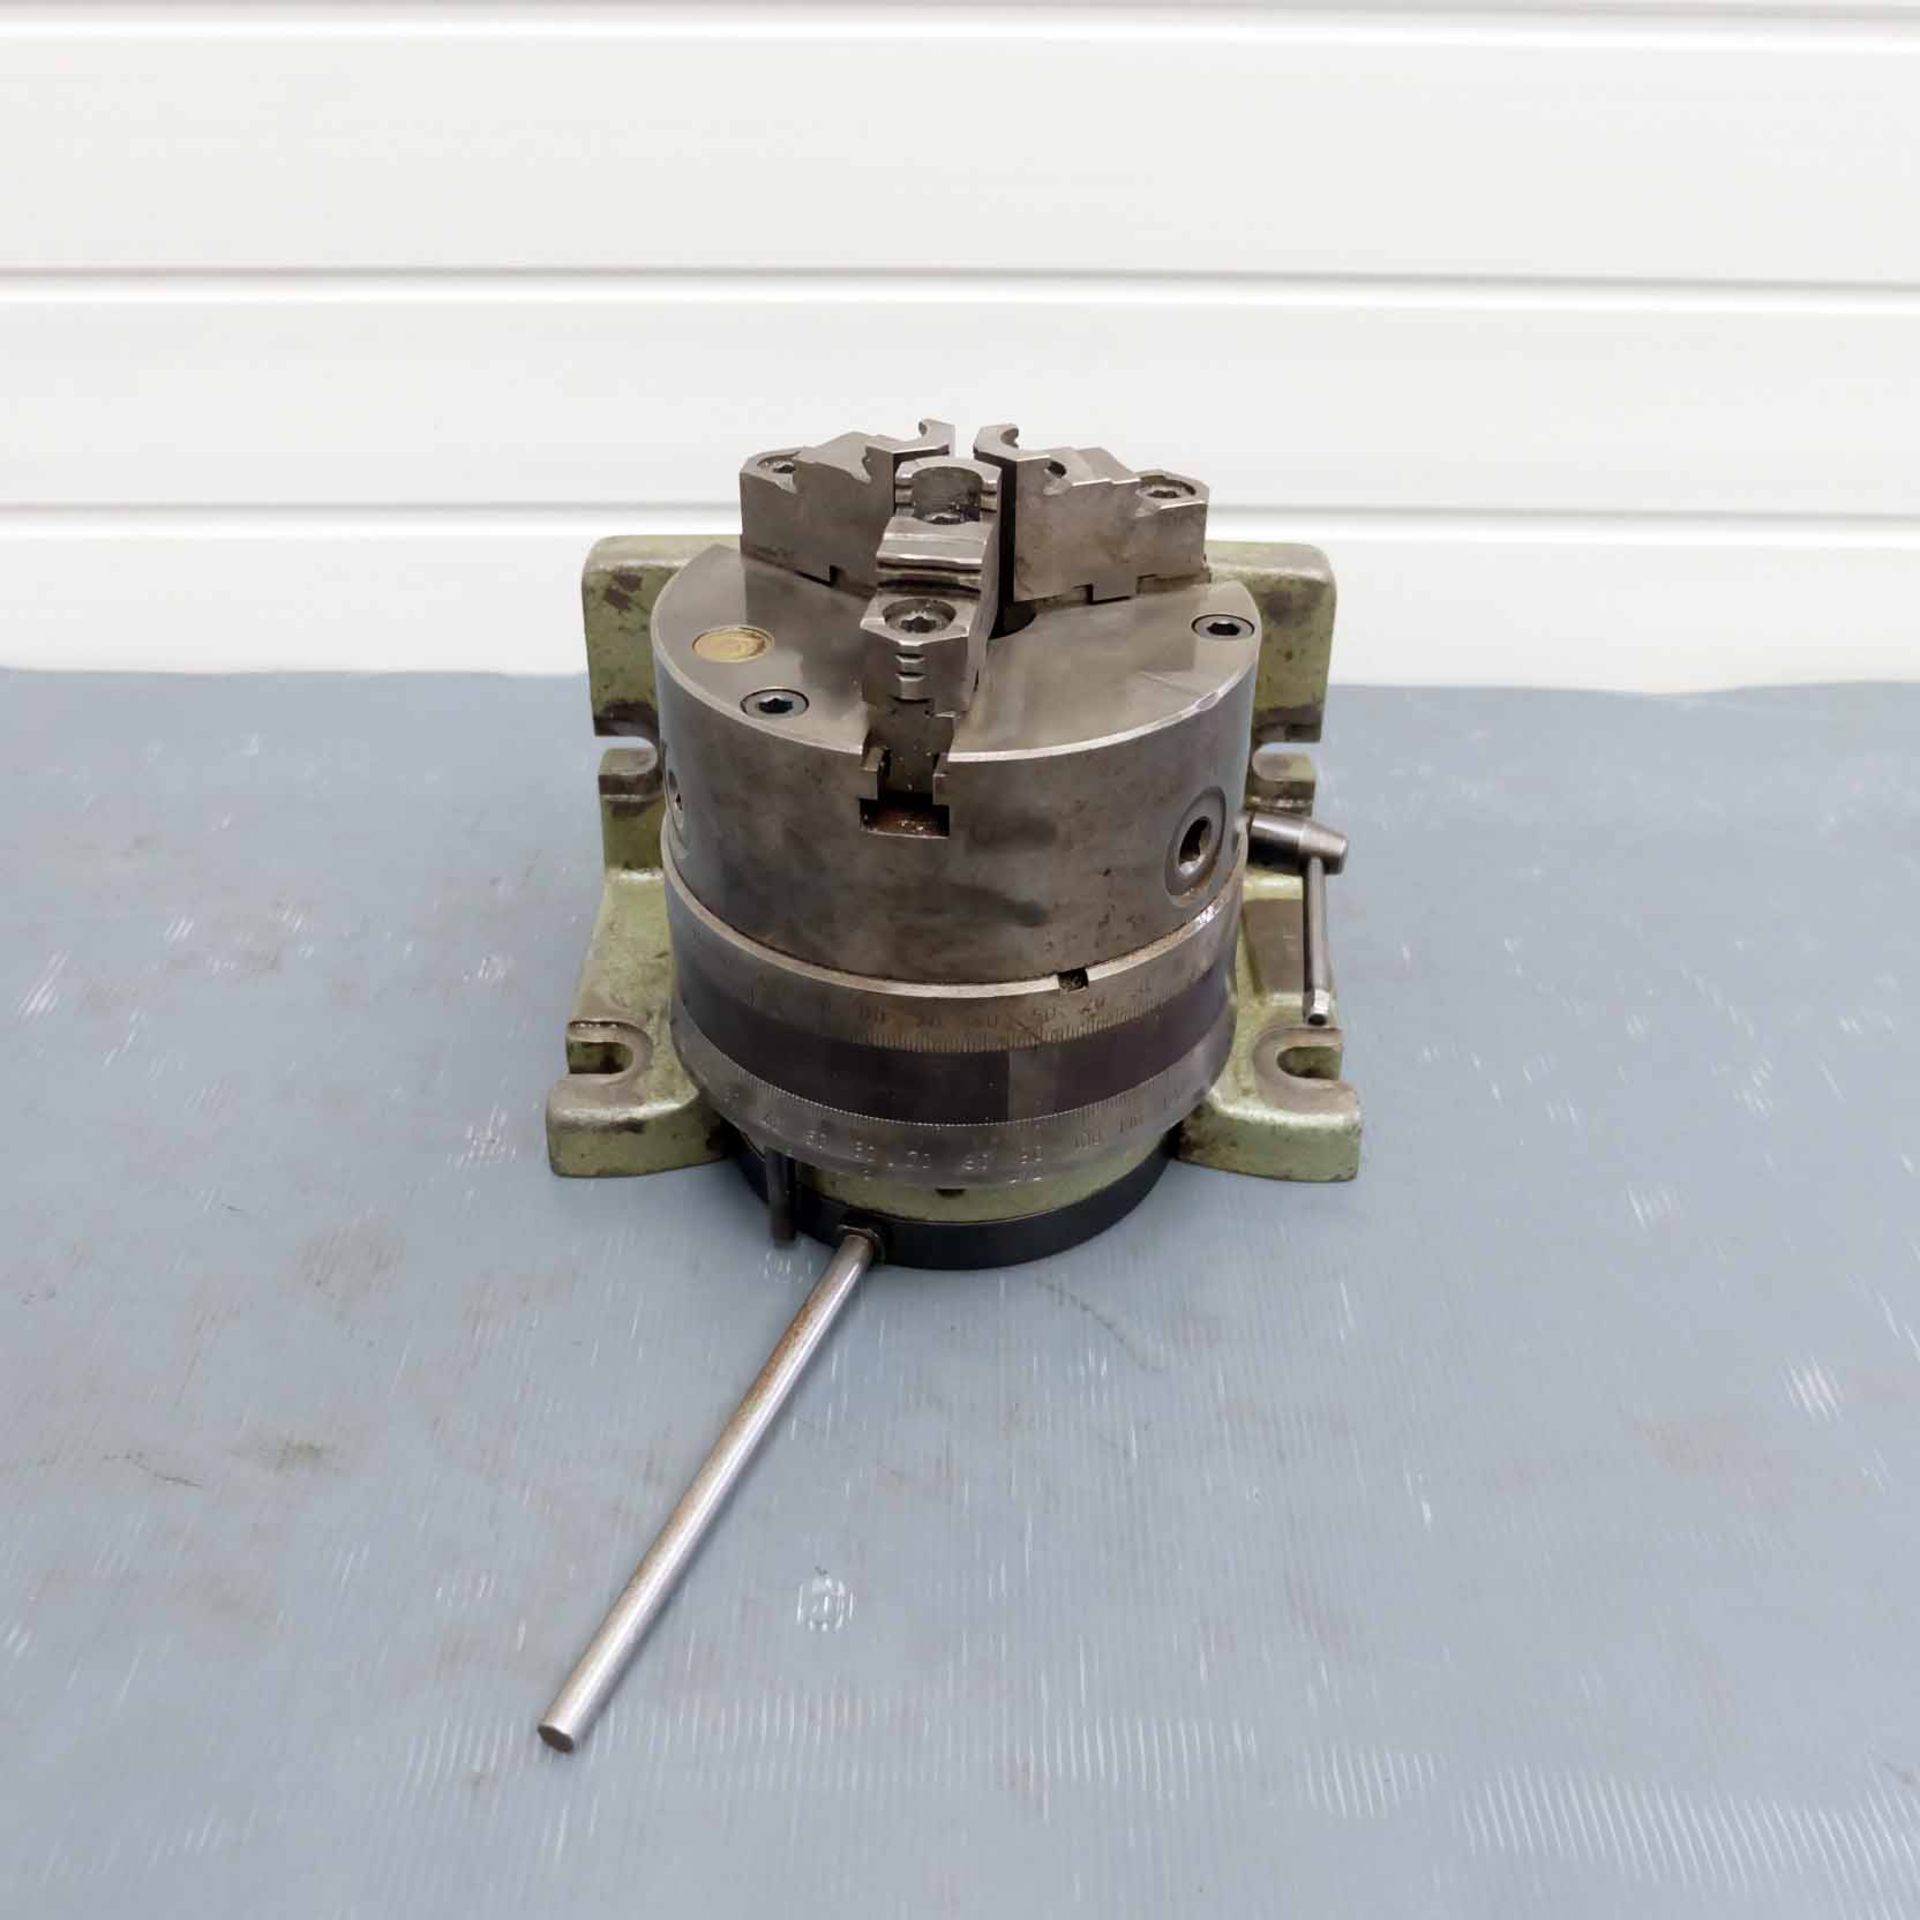 Vertical / Horizontal Indexing Workhead. With 6" 3 Jaw Chuck. Tailstock. - Image 9 of 11